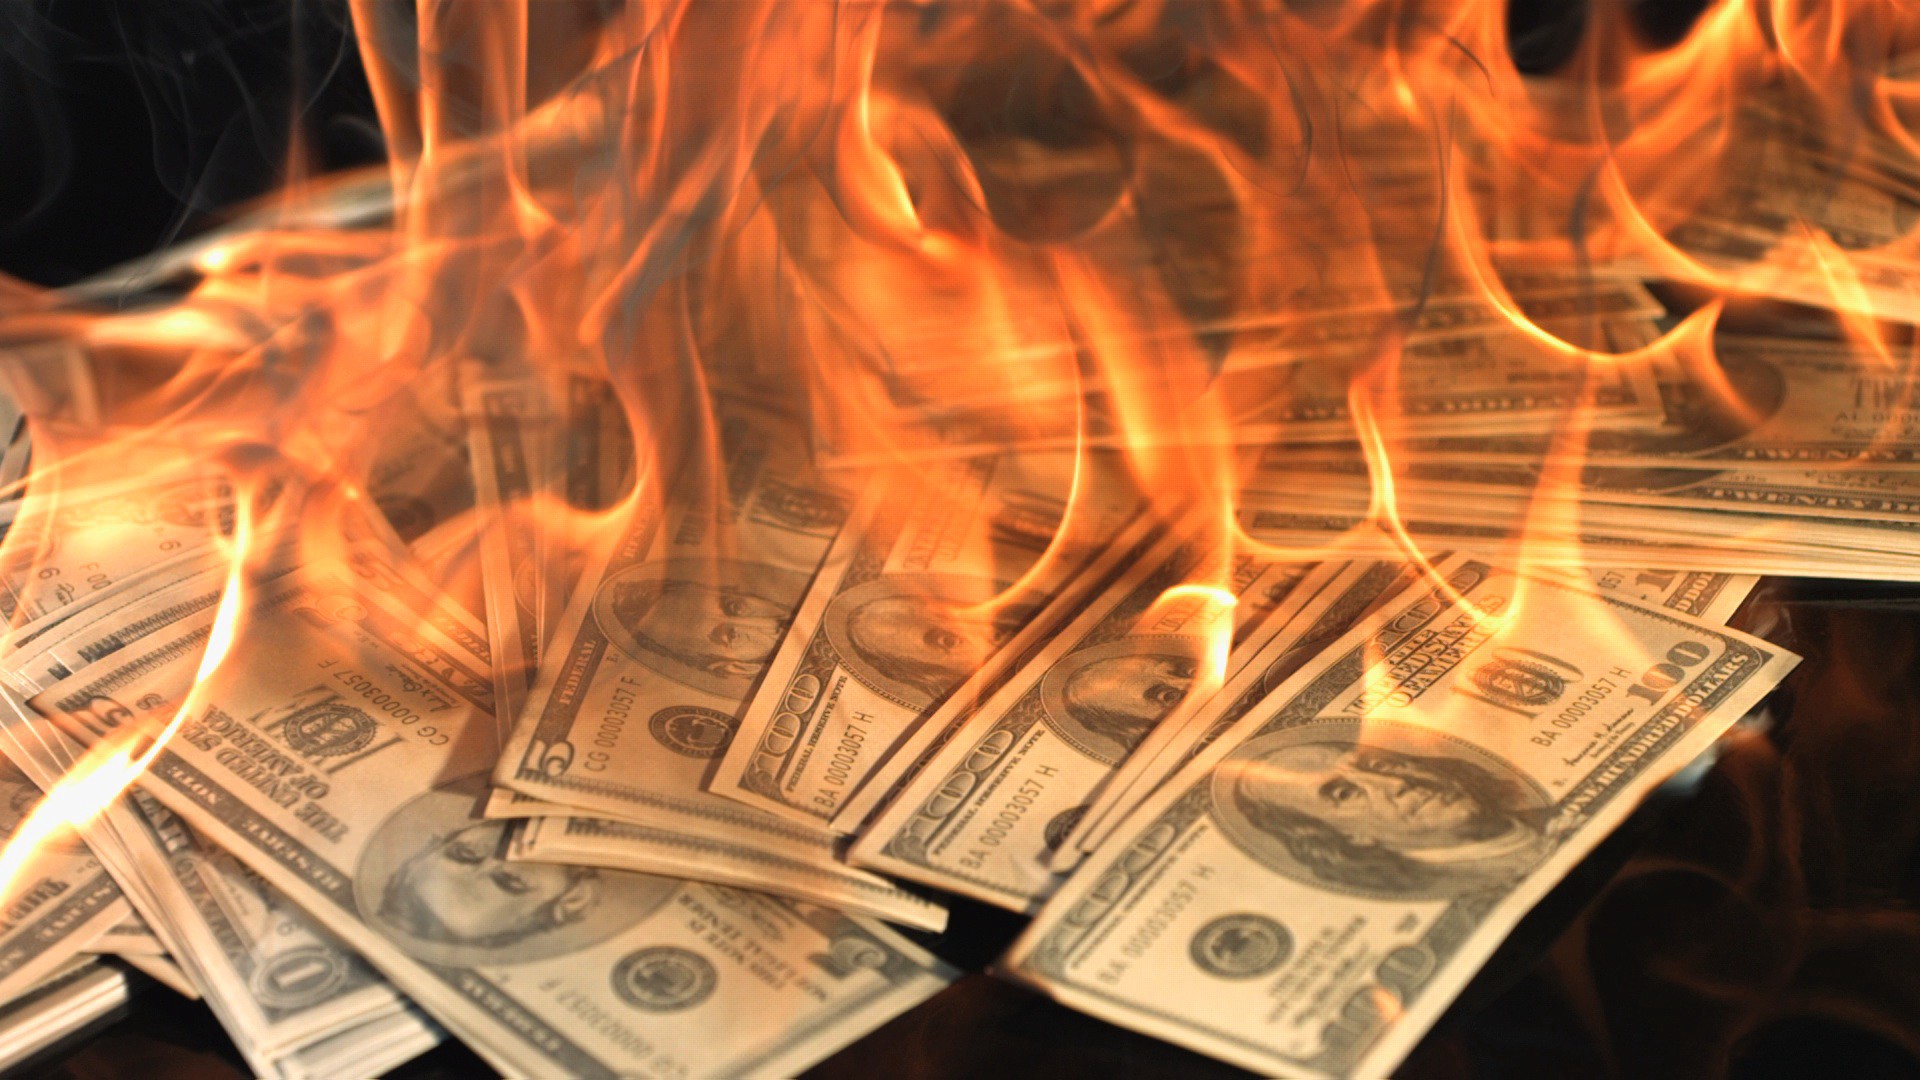 I Burned Through So Much Investor Cash The Fire Department Showed ...